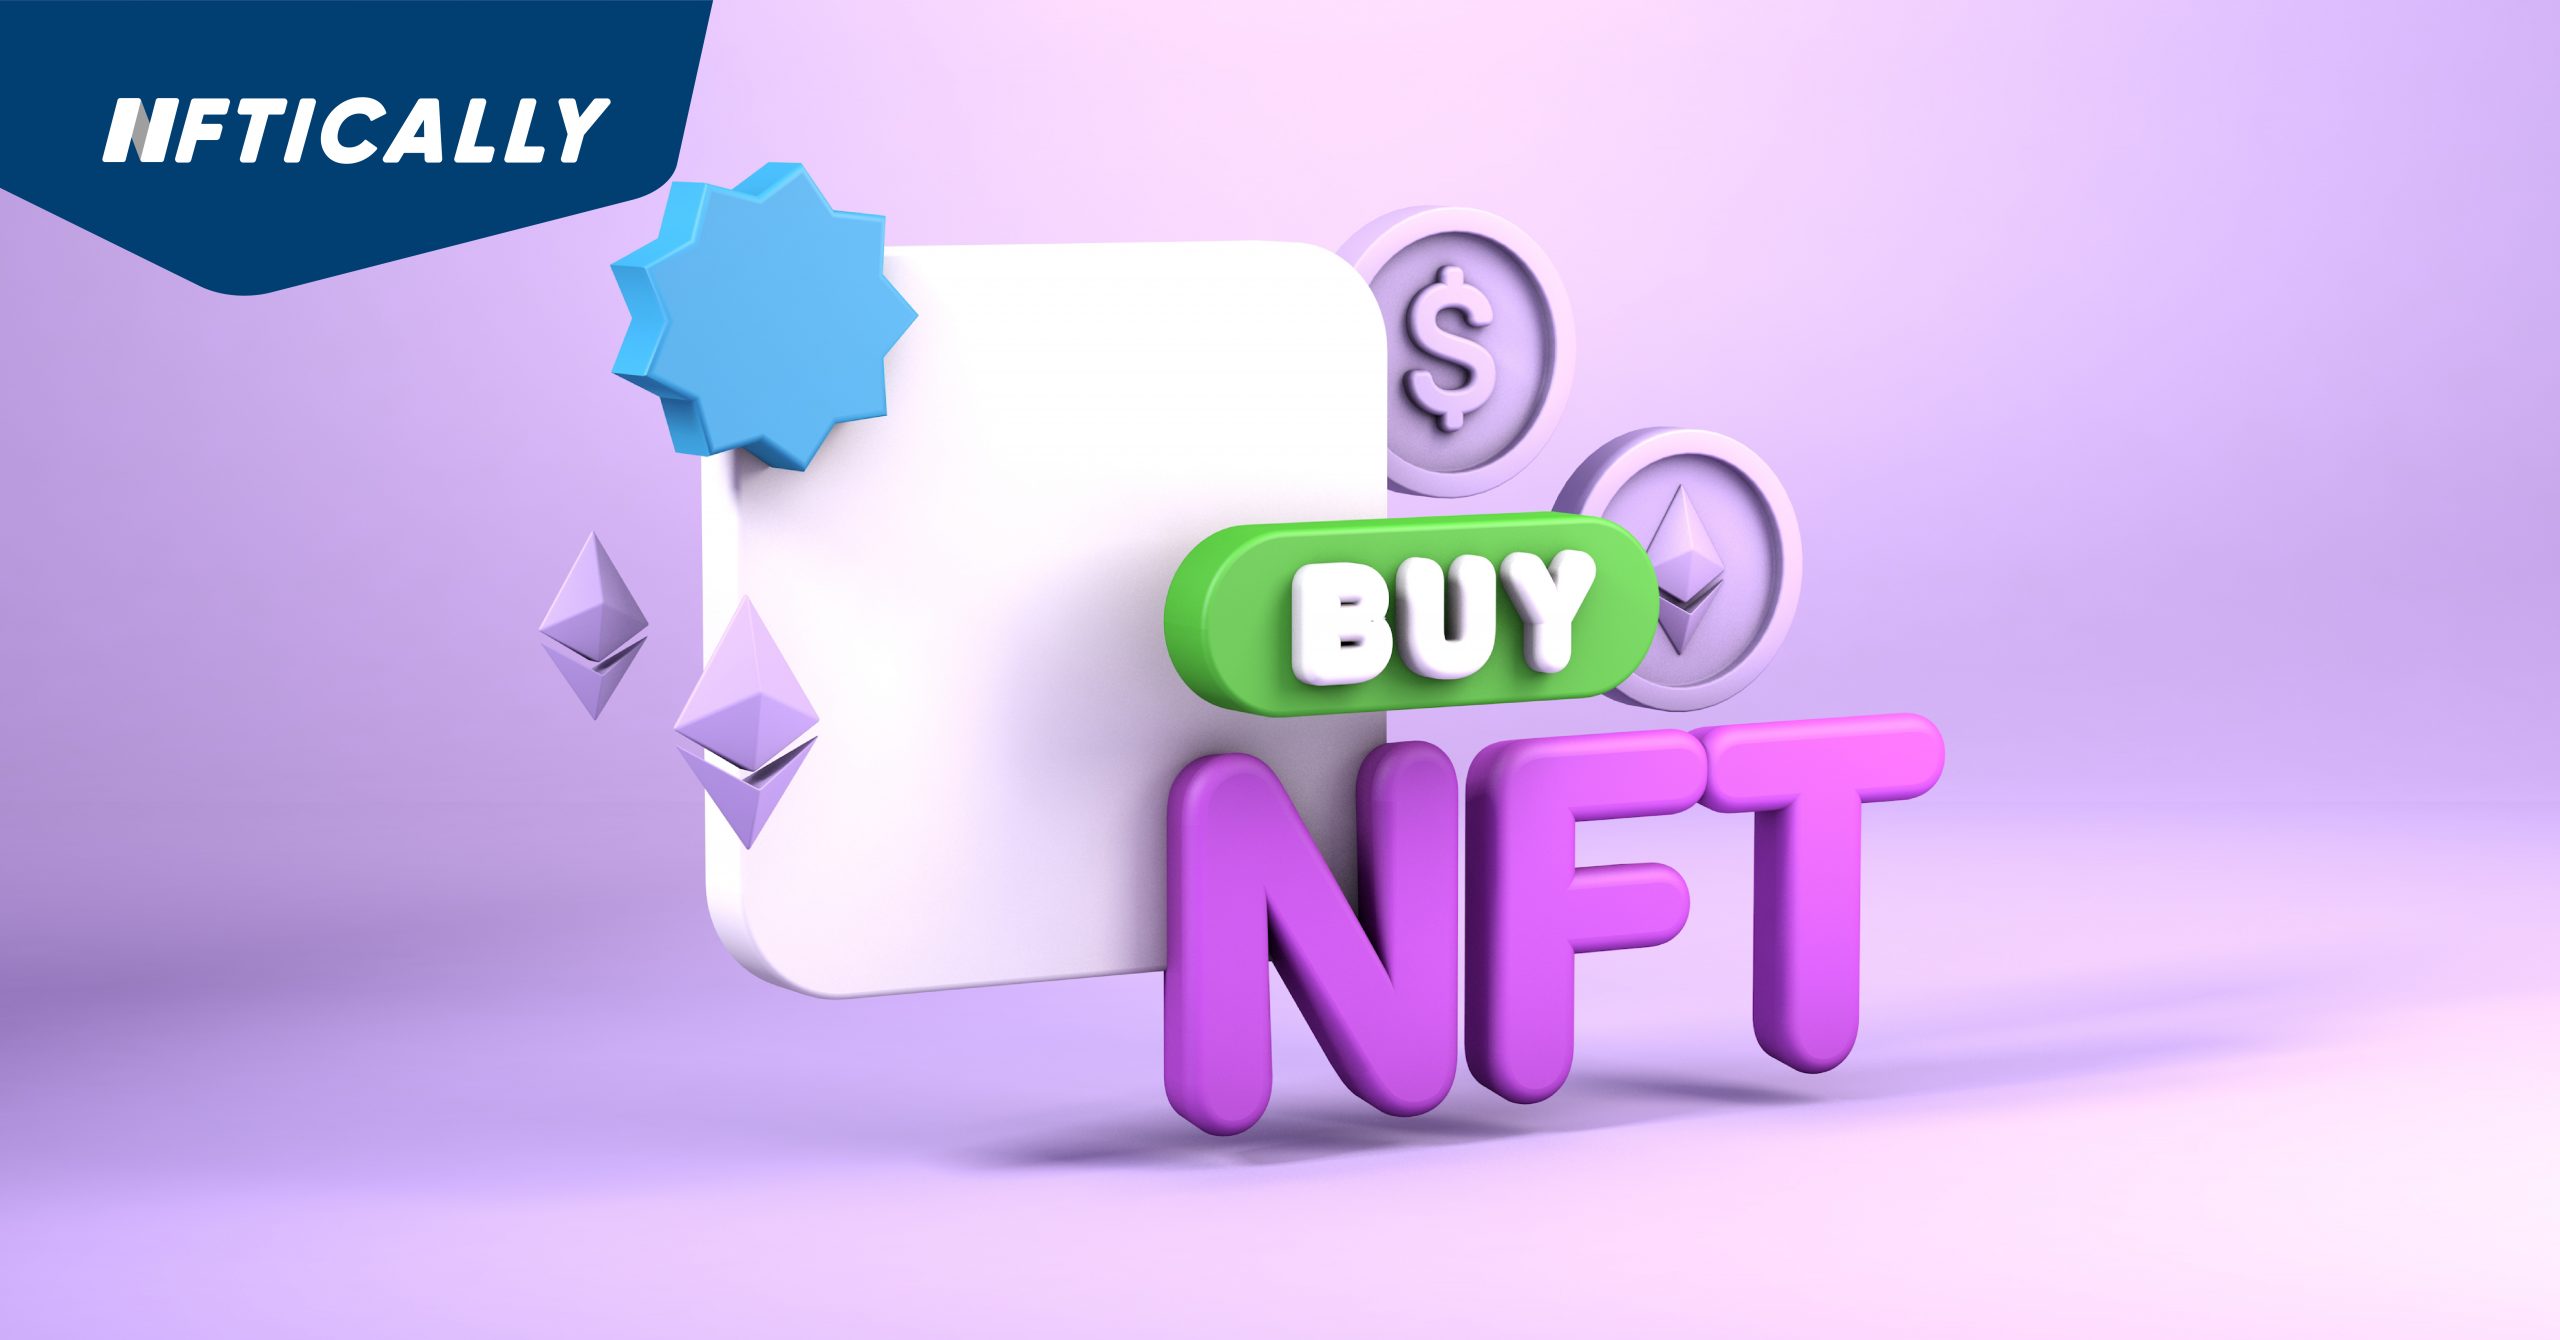 How to Purchase Your First NFT as a Complete Beginner